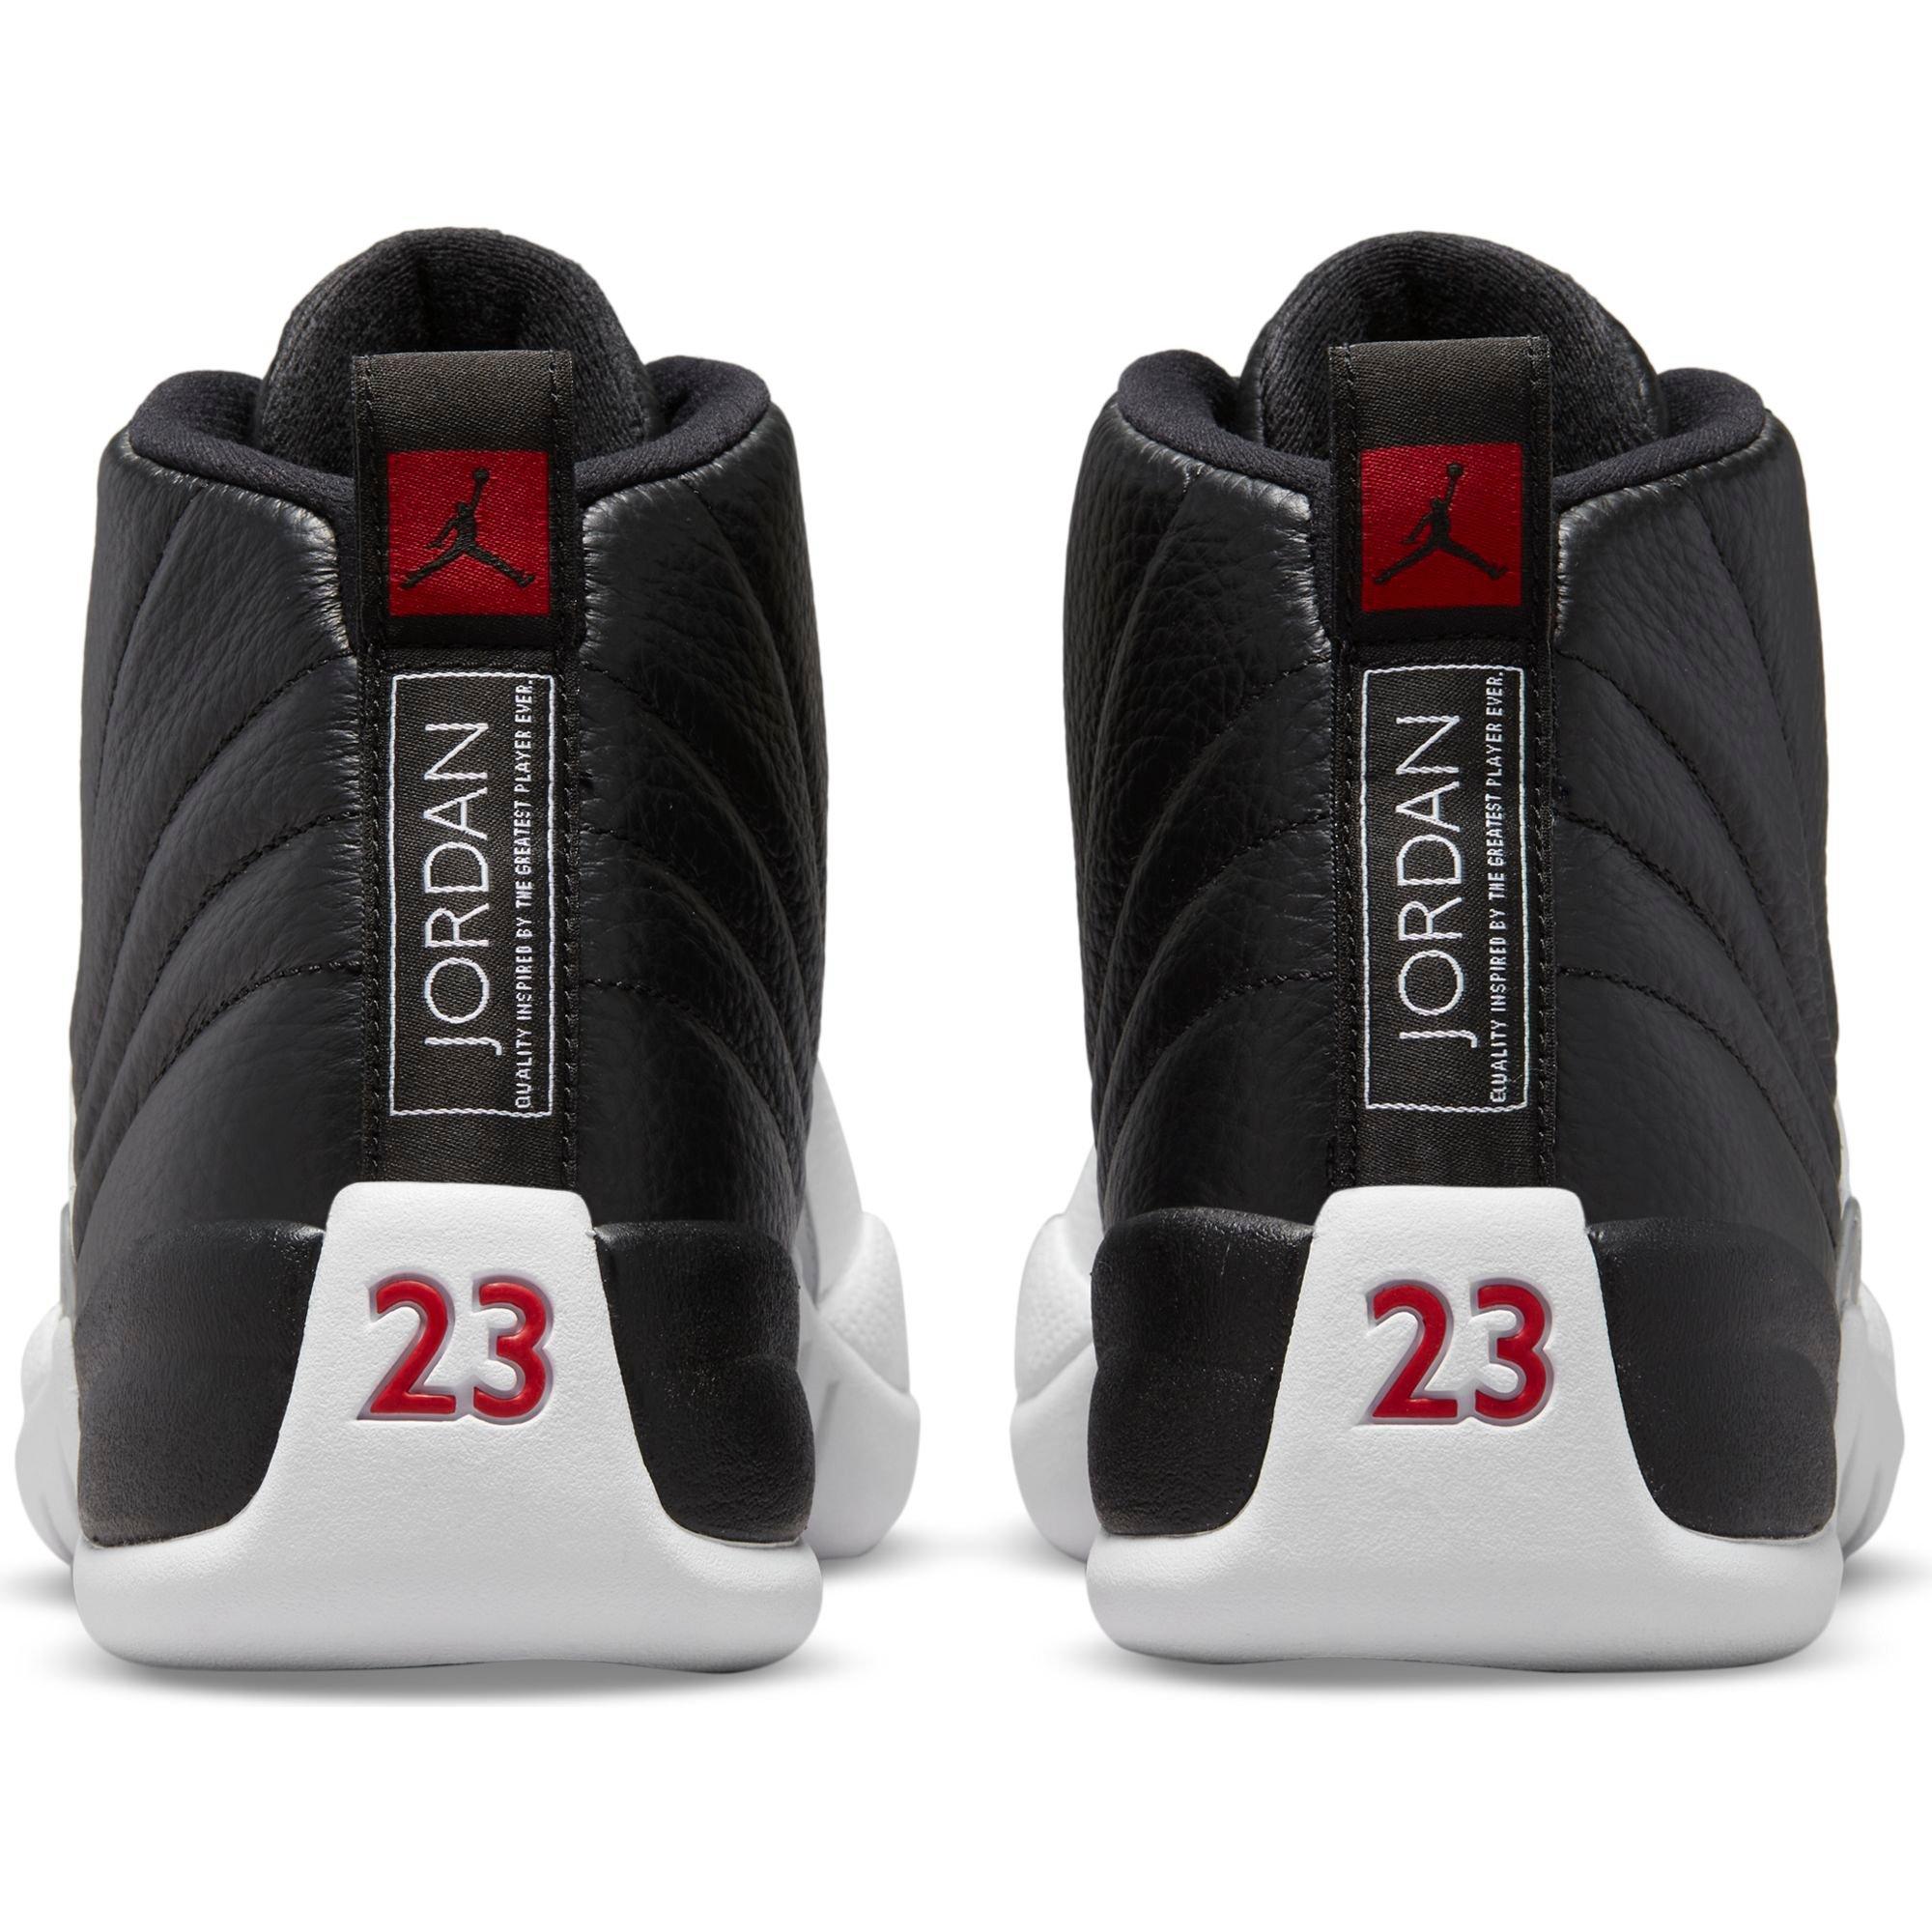 jordan 12 red and white